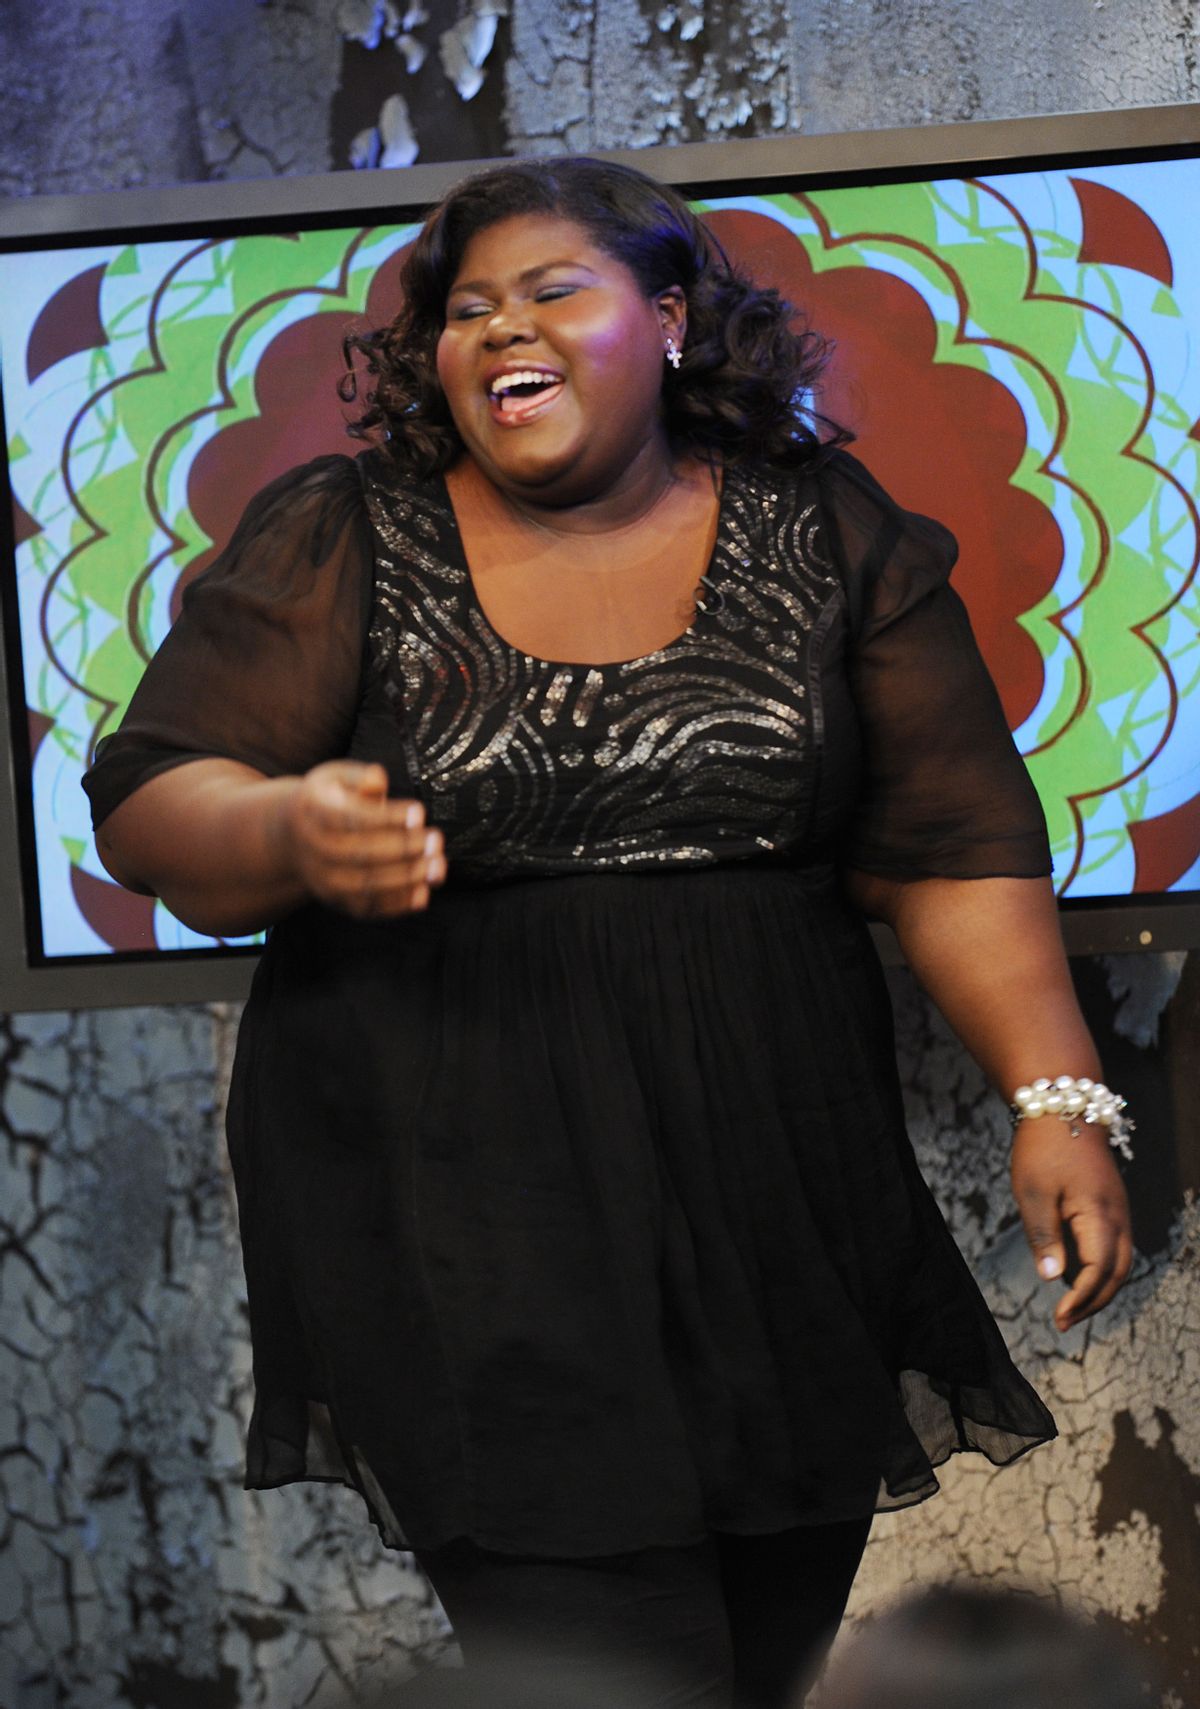 NEW YORK, NY - NOVEMBER 4:  EXCLUSIVE  Actress Gabourey "Gabby" Sidibe appears on the set of MTV's "It's On with Alexa Chung" at the MTV Times Square Studios on November 4, 2009 in New York City.  (Photo by Scott Gries/PictureGroup) via AP IMAGES (Scott Gries/picturegroup Via Ap Images)